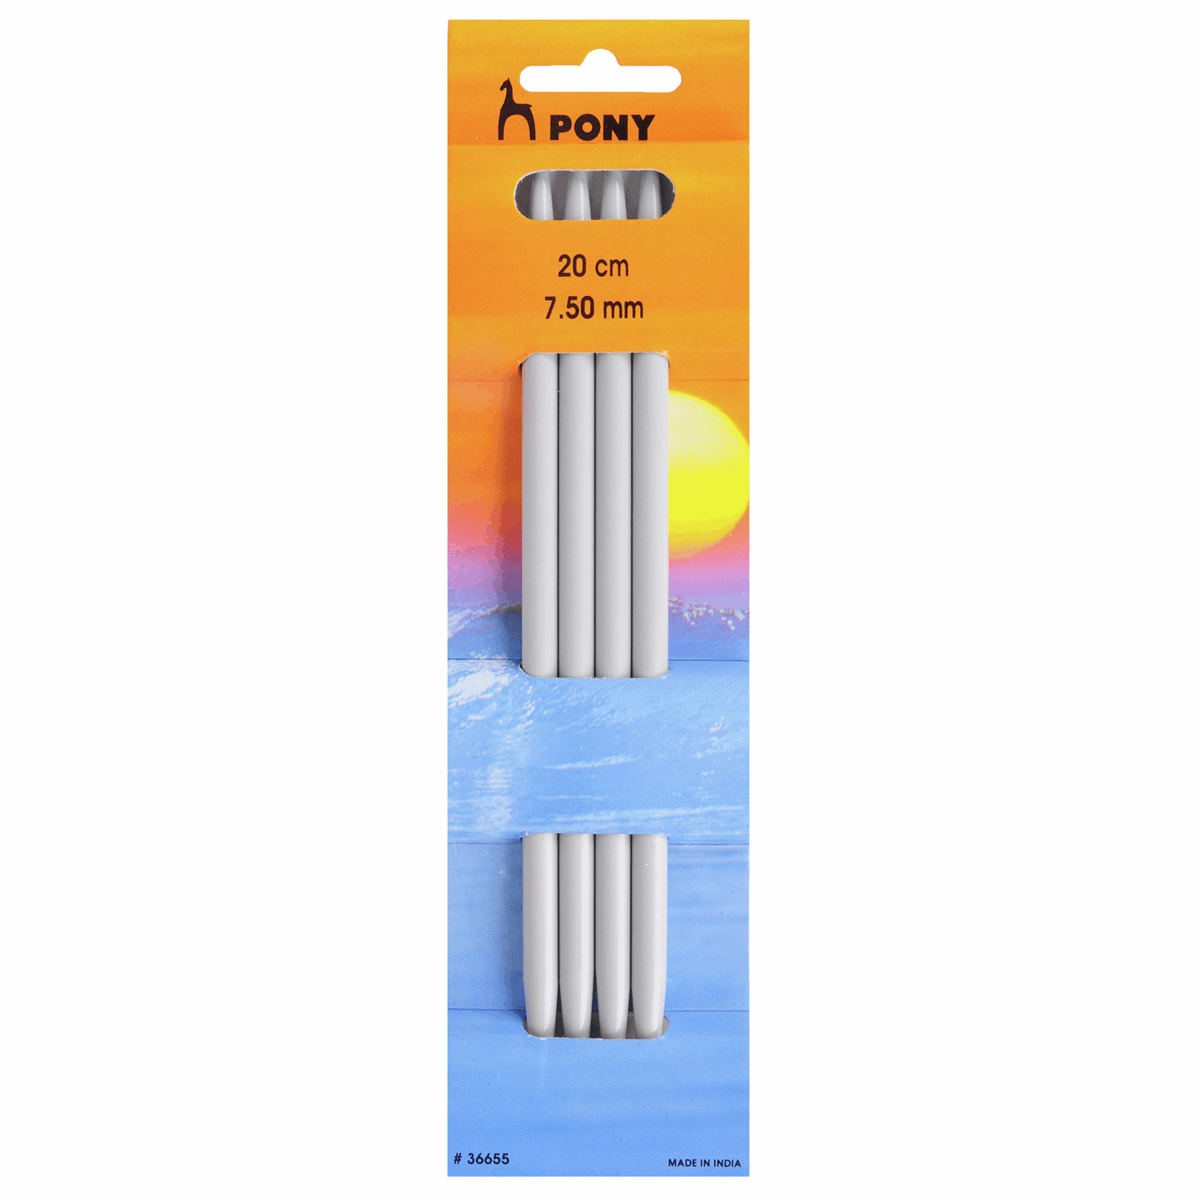 PONY Double-Ended Knitting Pins - 20cm x 7.50mm (Set of 4)